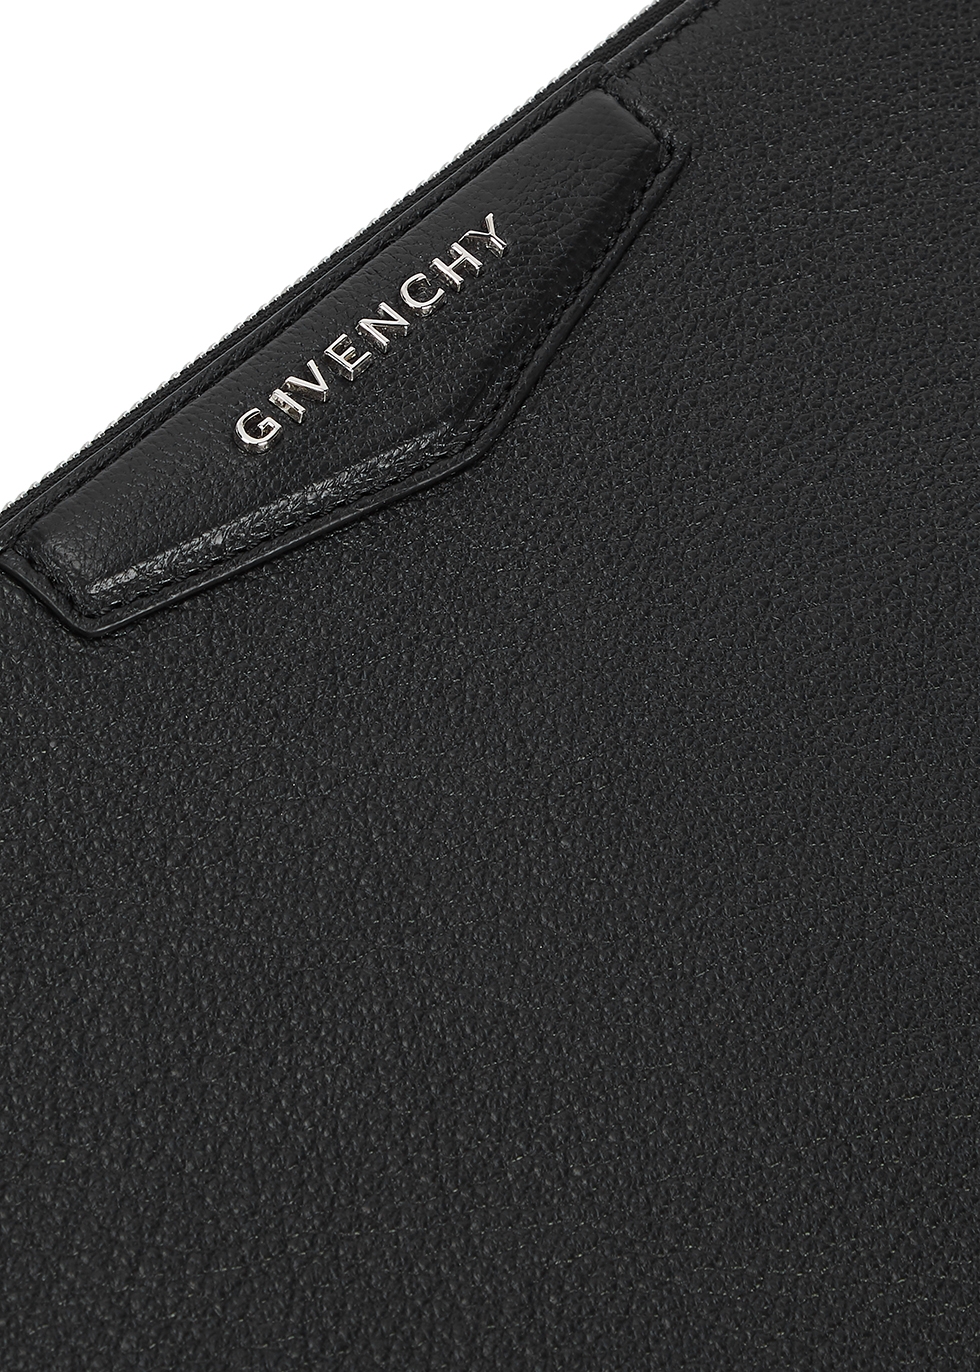 givenchy black pouch